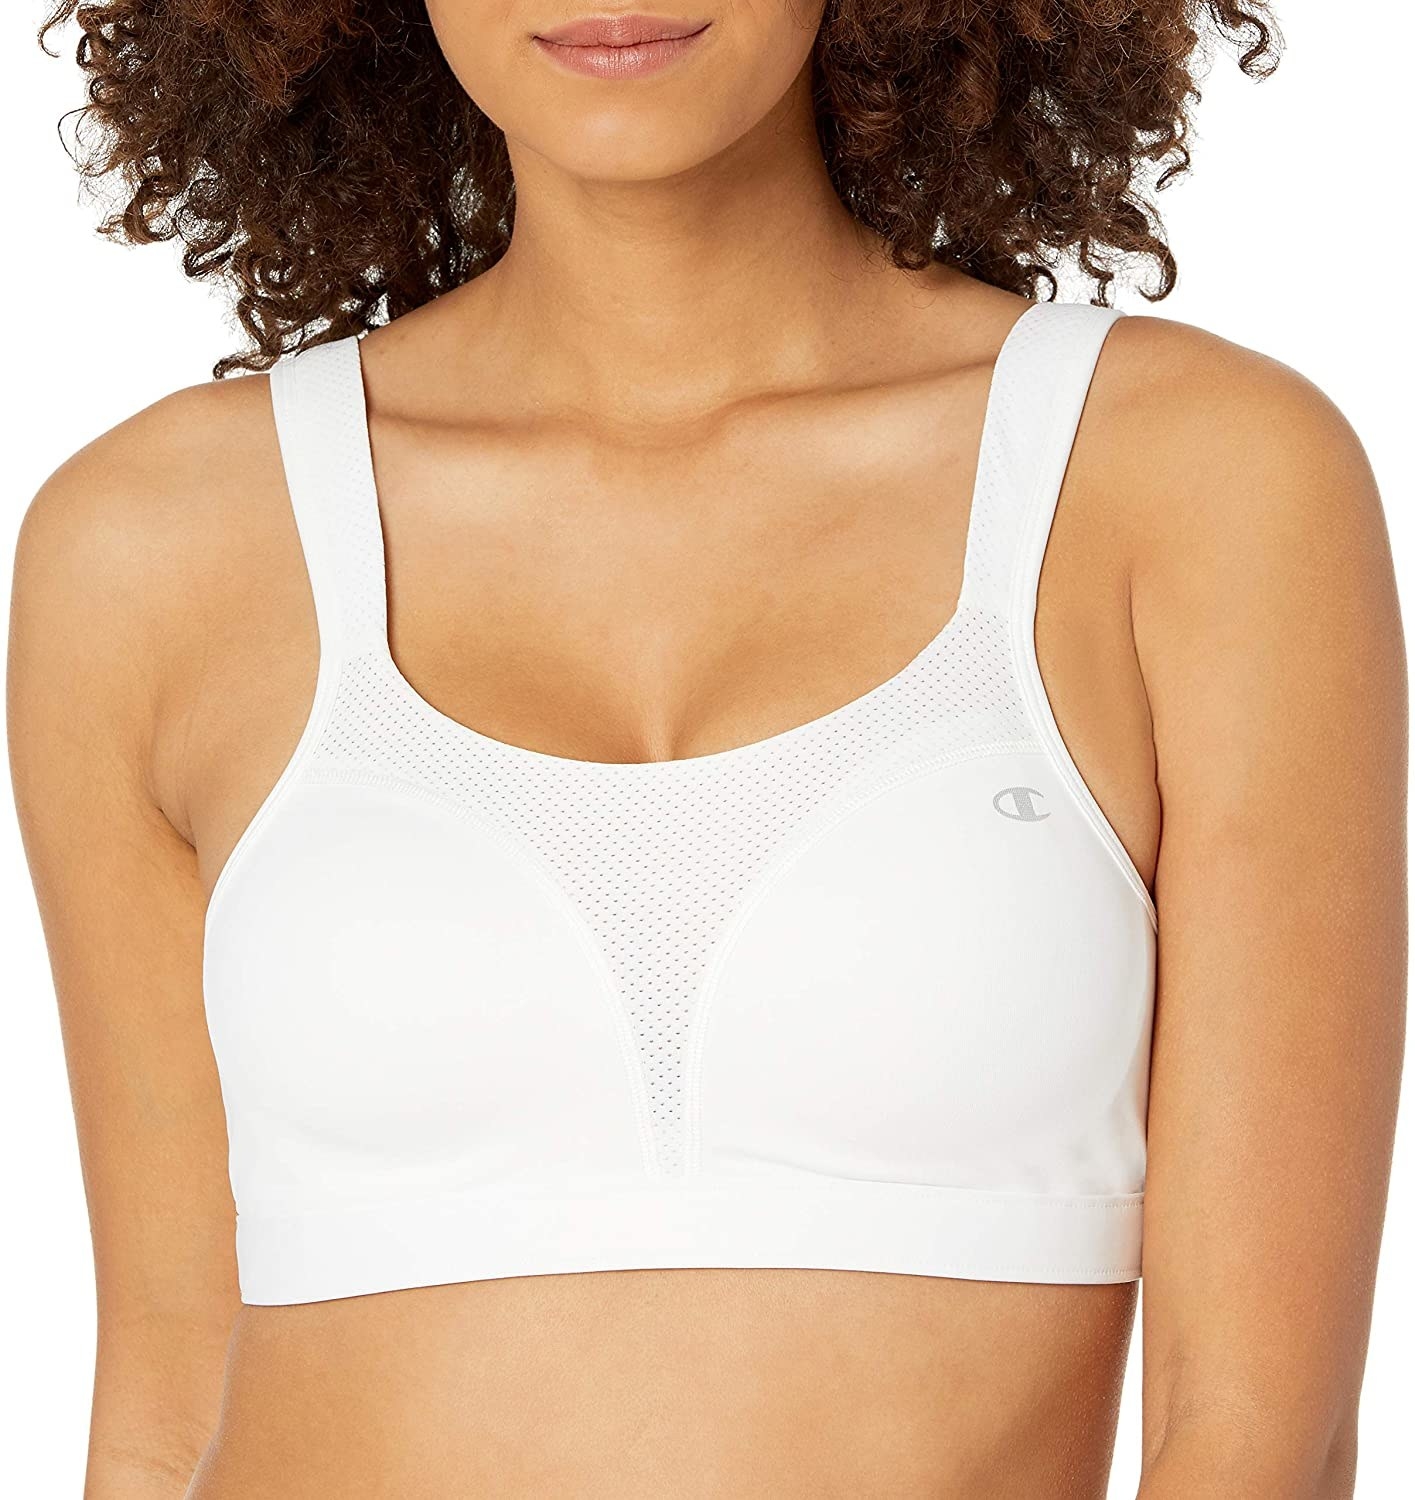 I'm a 34DDD and constantly spill out of things - I found the cutest sports  bra for big breasts, it fits perfectly